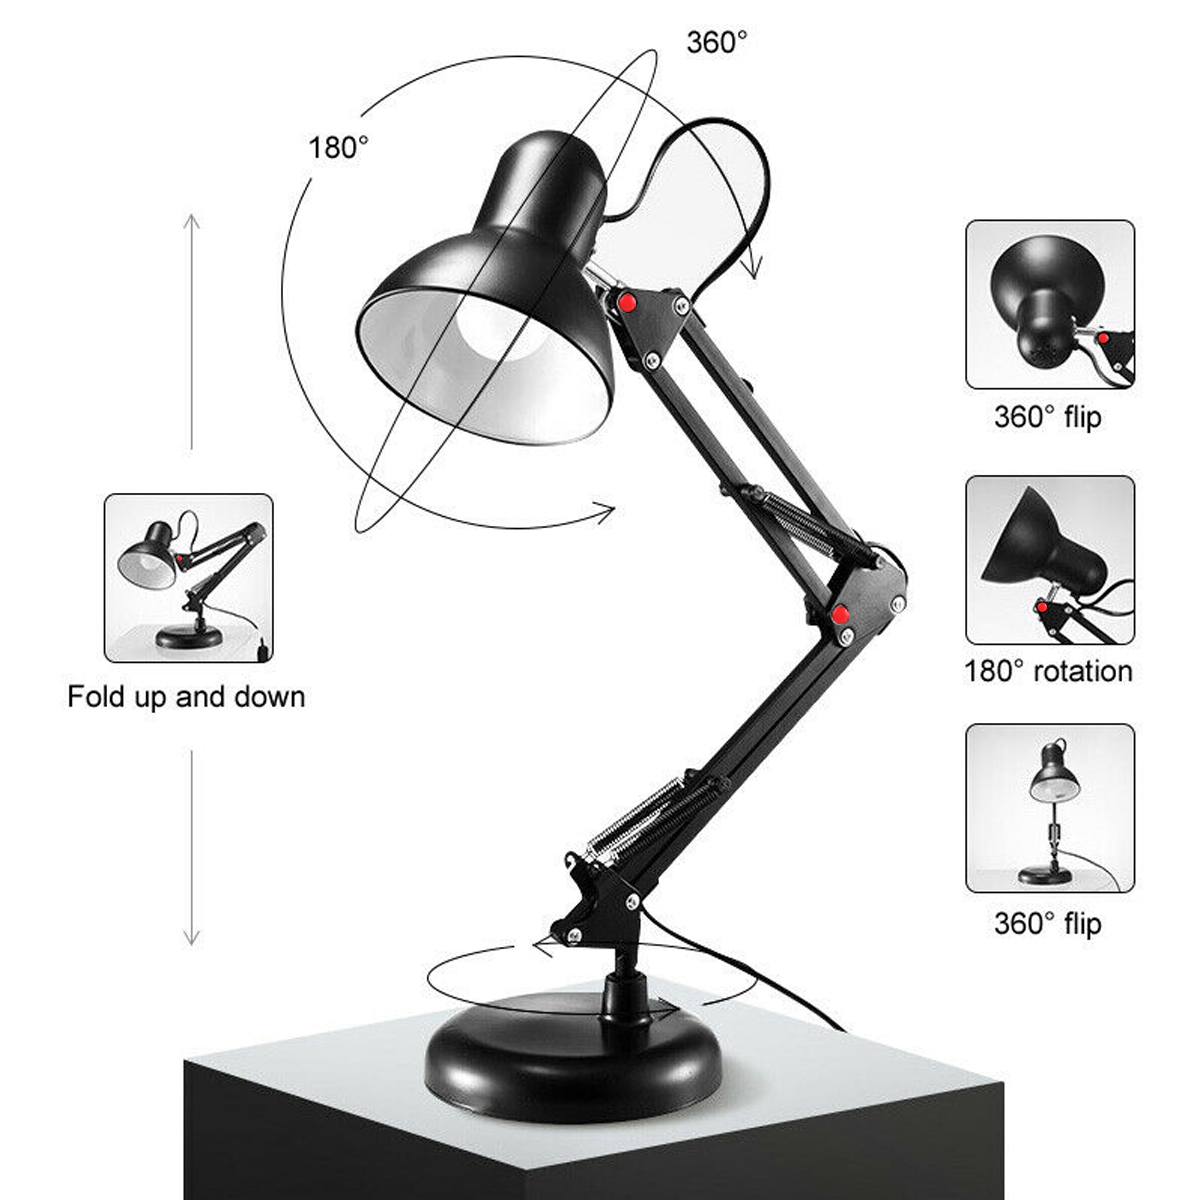 5W-Super-Bright-Swing-Arm-Desk-Lamp-Clamp-on-Table-Light-with-LED-Bulb-Metal-Clip-220V-1742397-5